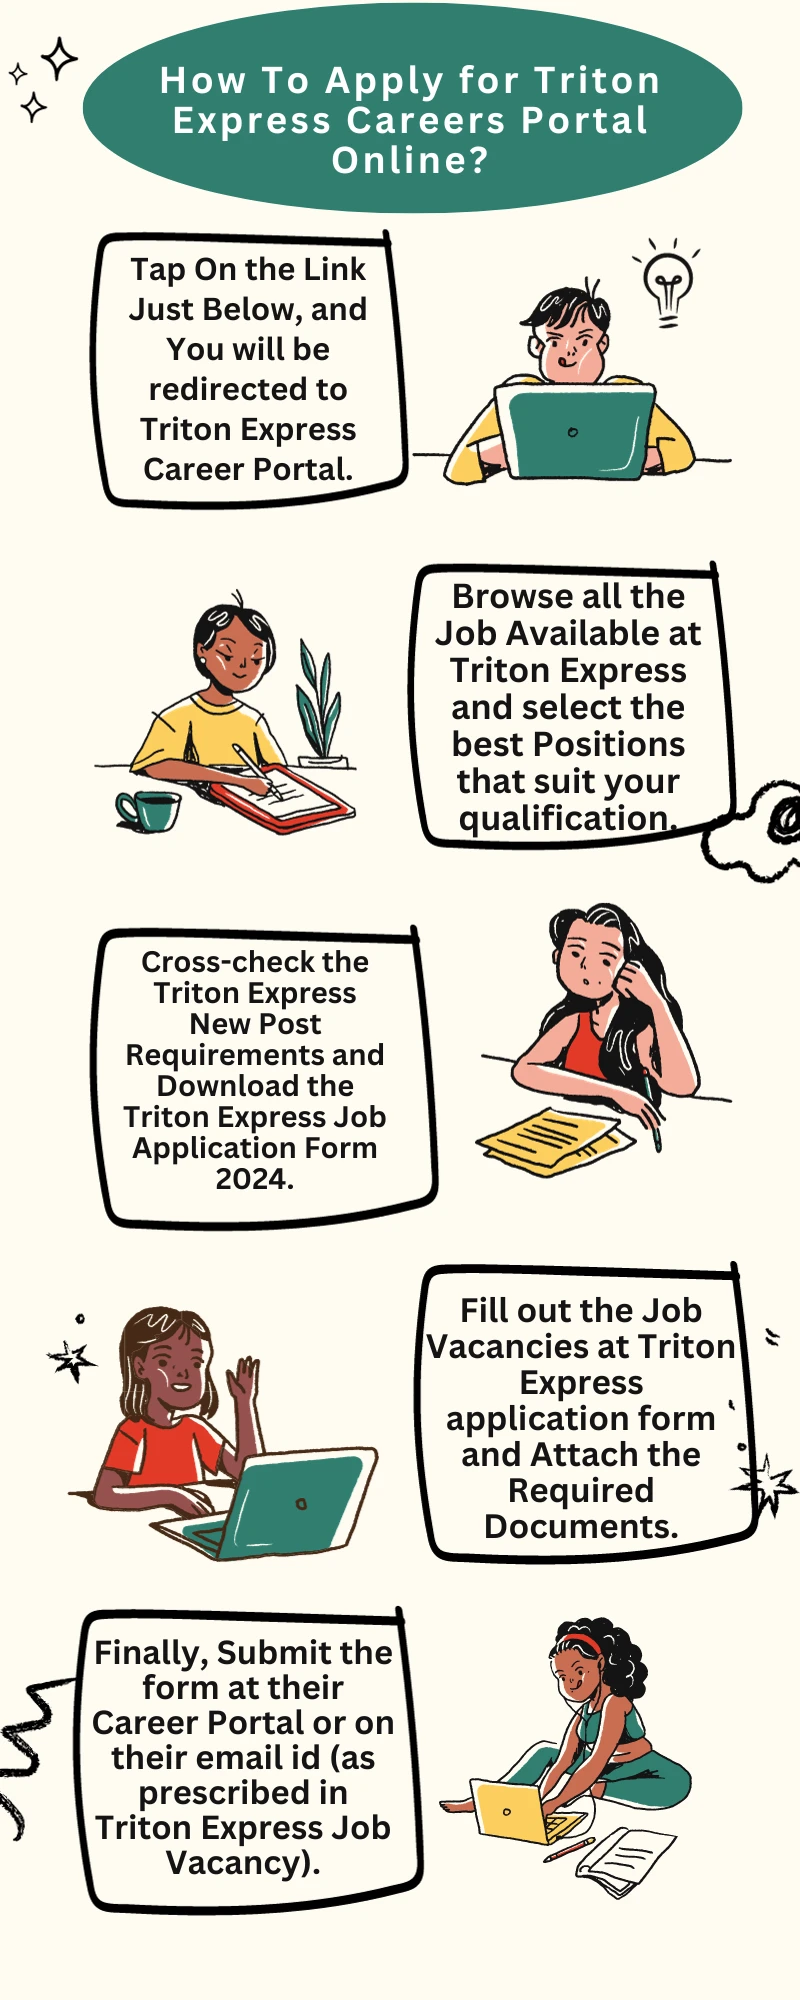 How To Apply for Triton Express Careers Portal Online?